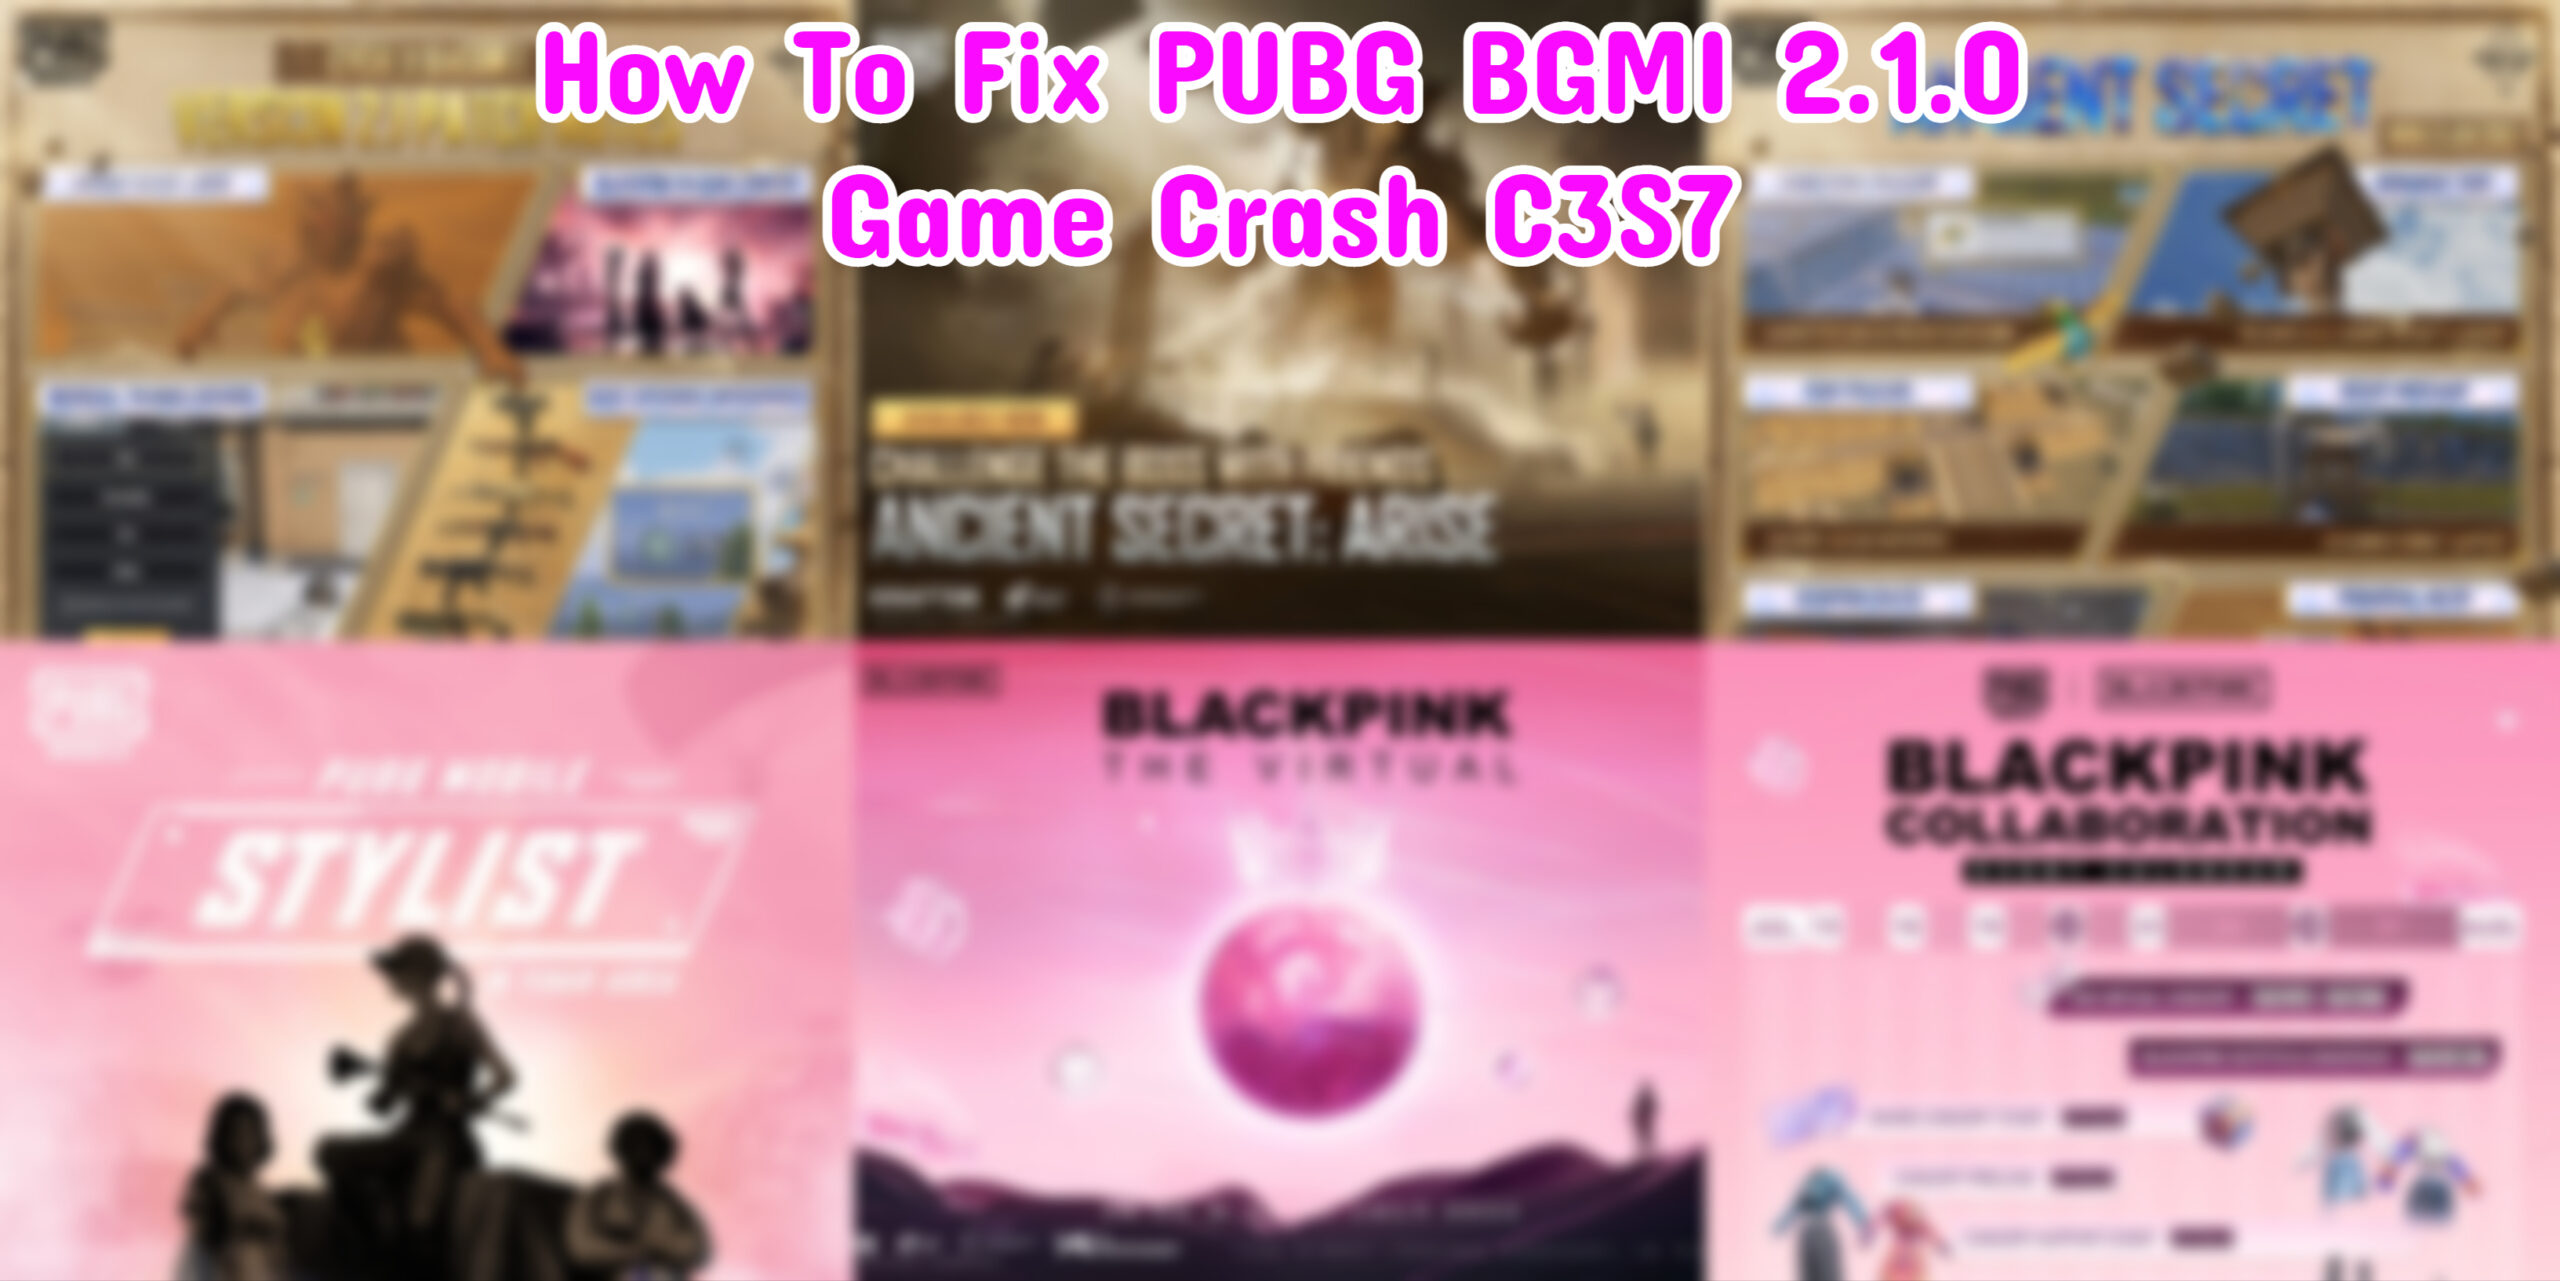 You are currently viewing PUBG BGMI 2.1 Game Crash Fixer Shell C3S7